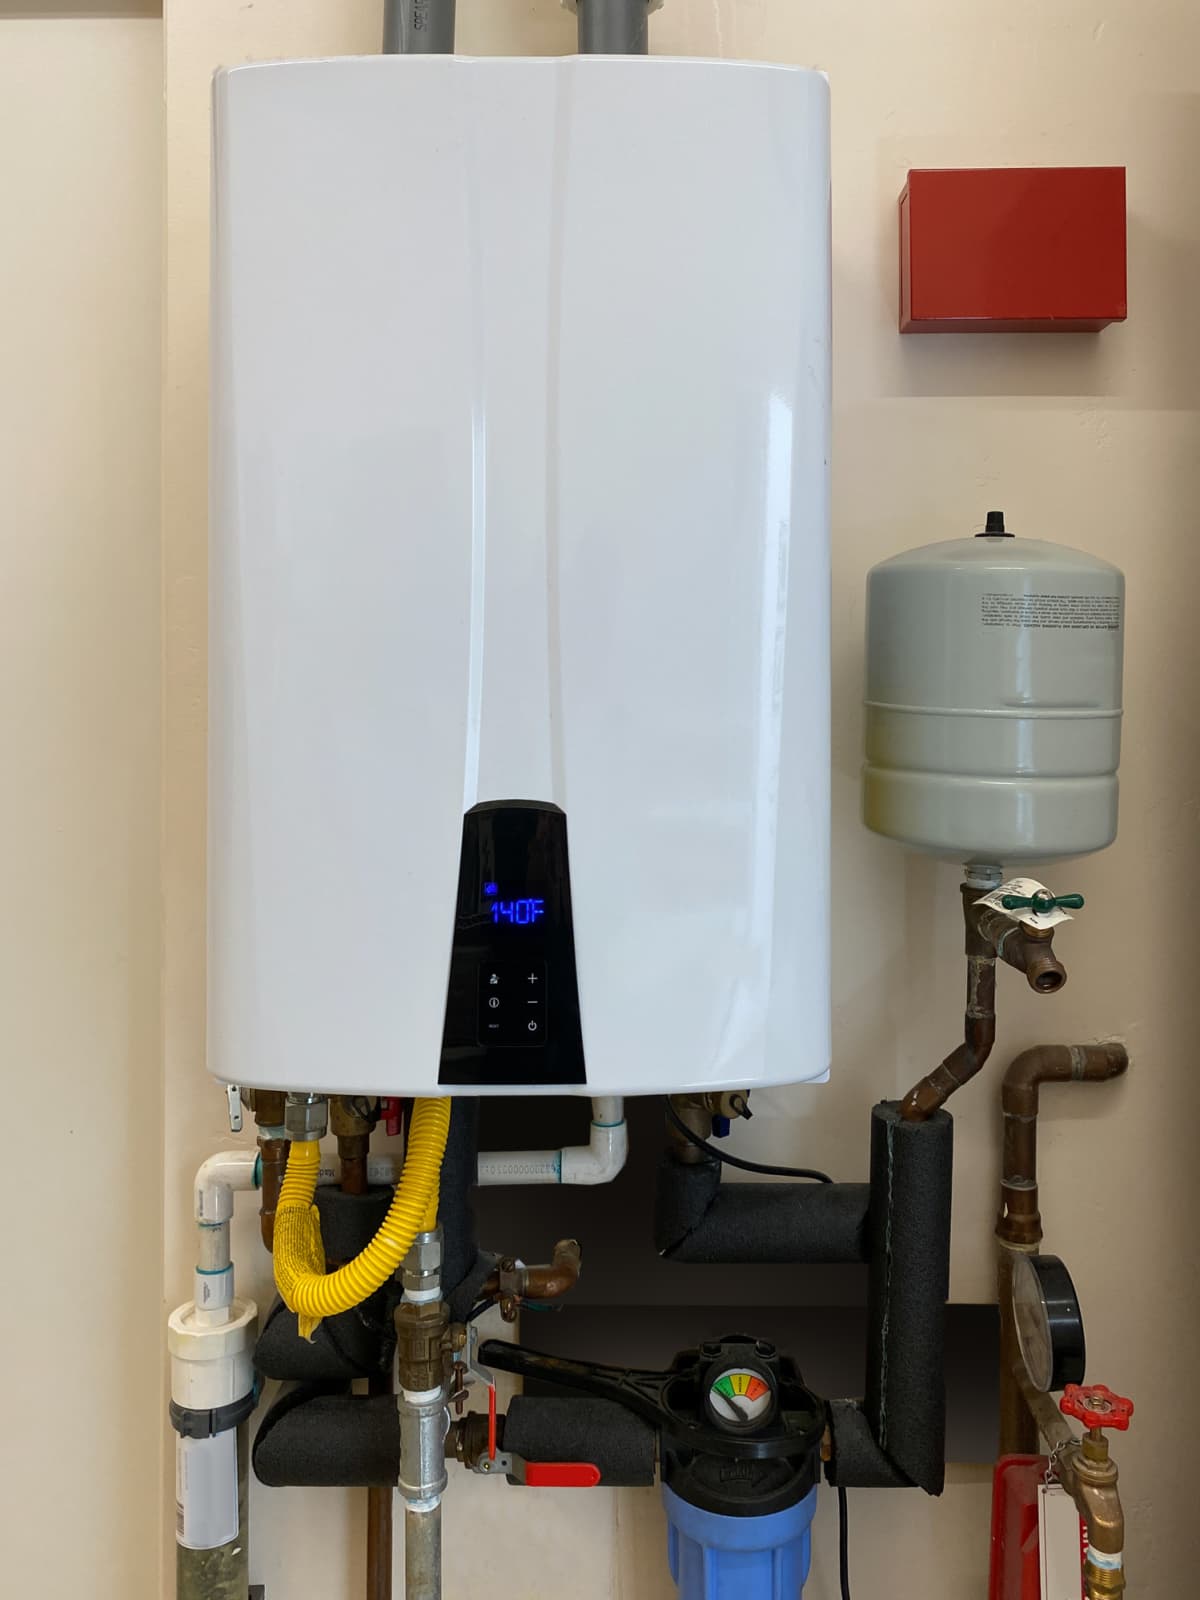 Tankless water heater mounted on a wall.